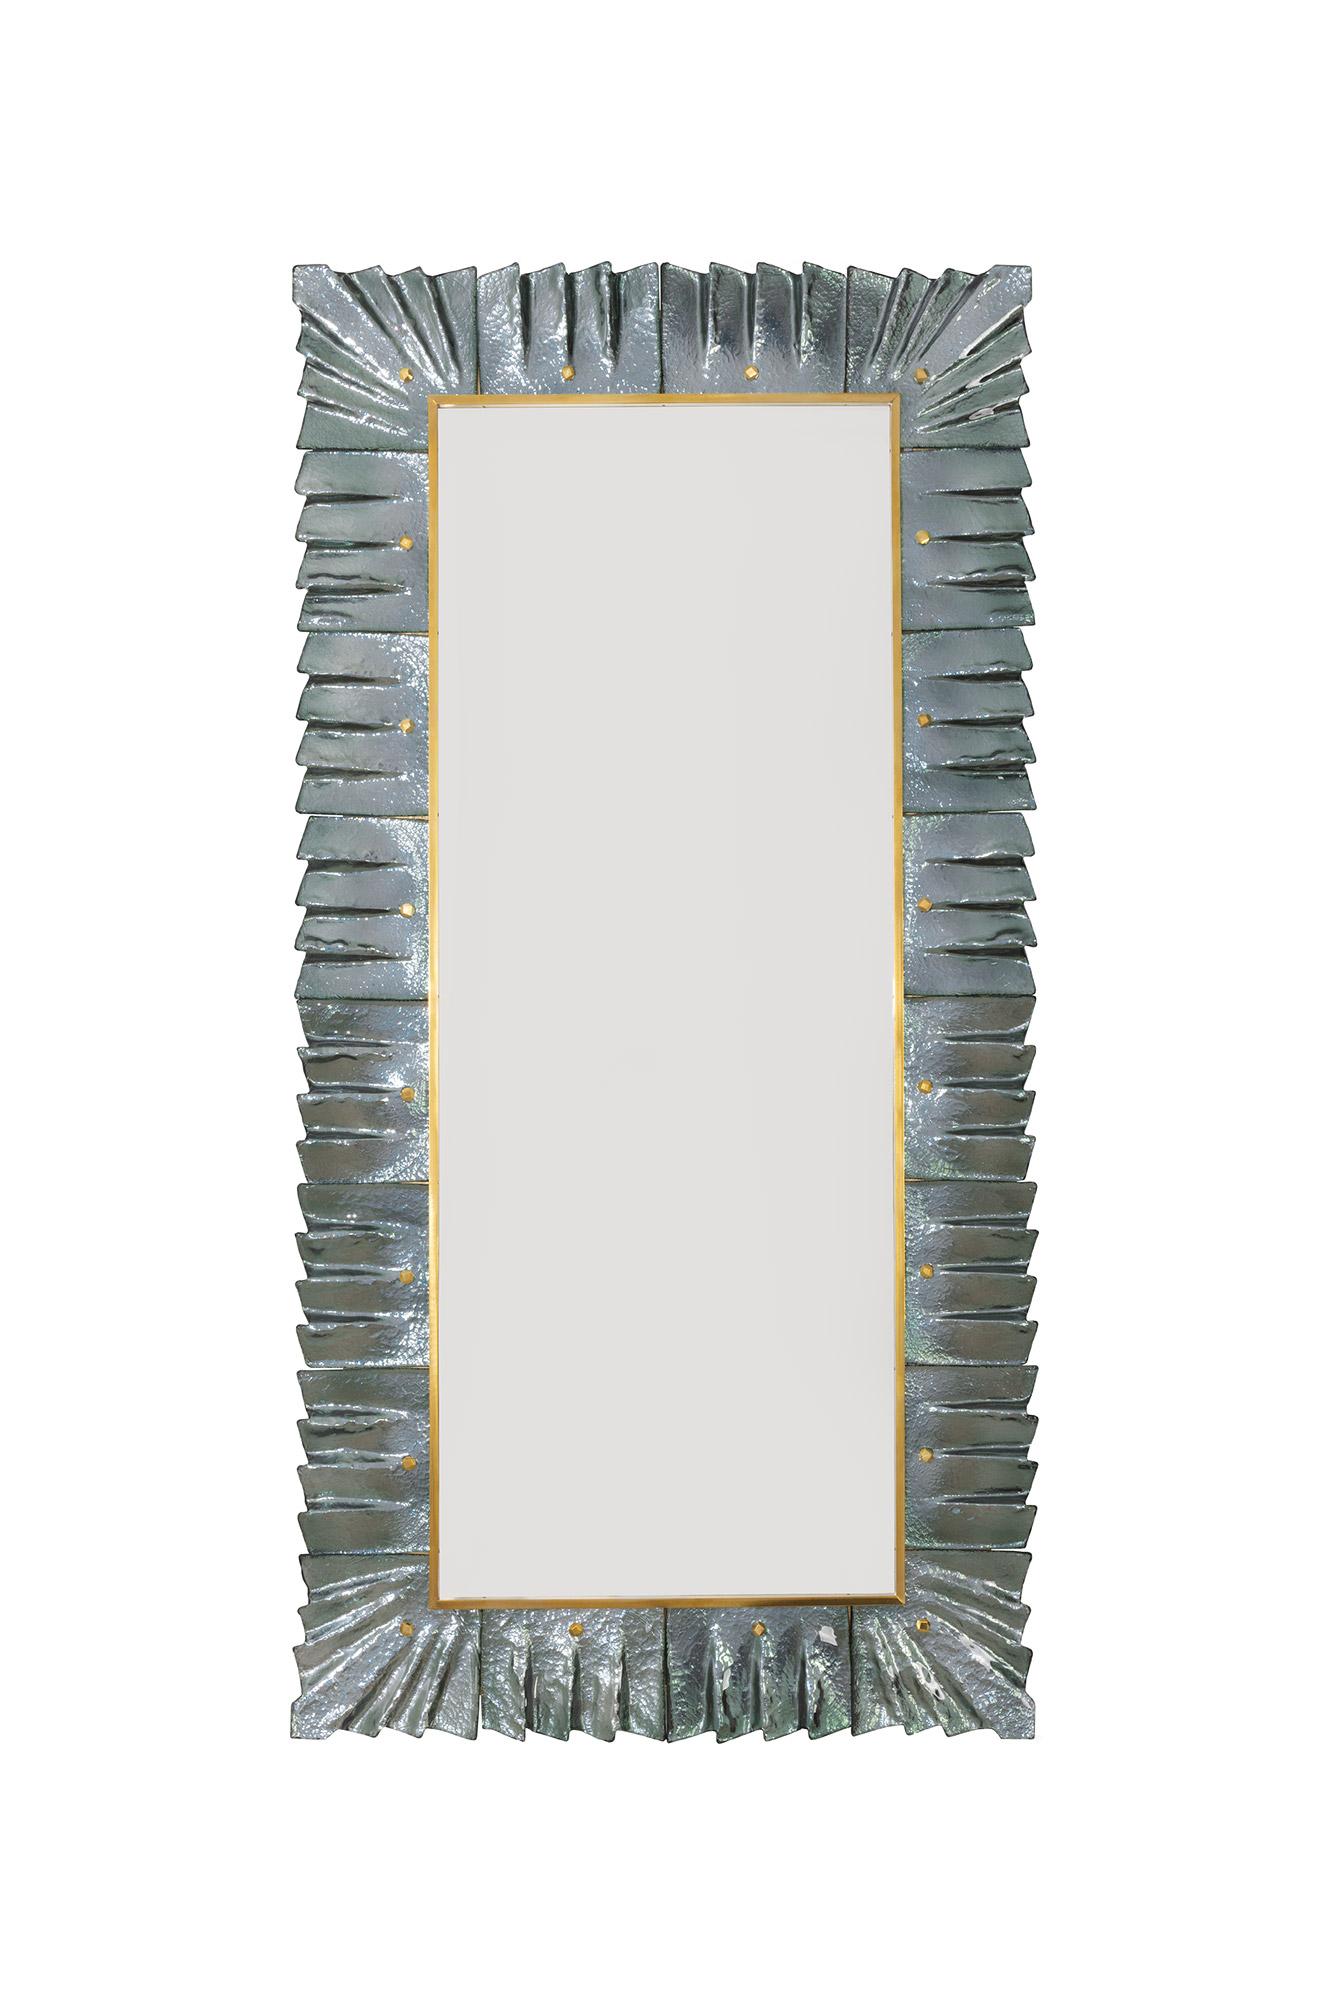 Pair of large rectangular Murano sea green teal glass and brass framed mirrors, in stock. 
Rectangular mirror plate surrounded with undulating glass tiles in sea green teal glass color held by brass cabochons. 
Luxury handcrafted by a team of